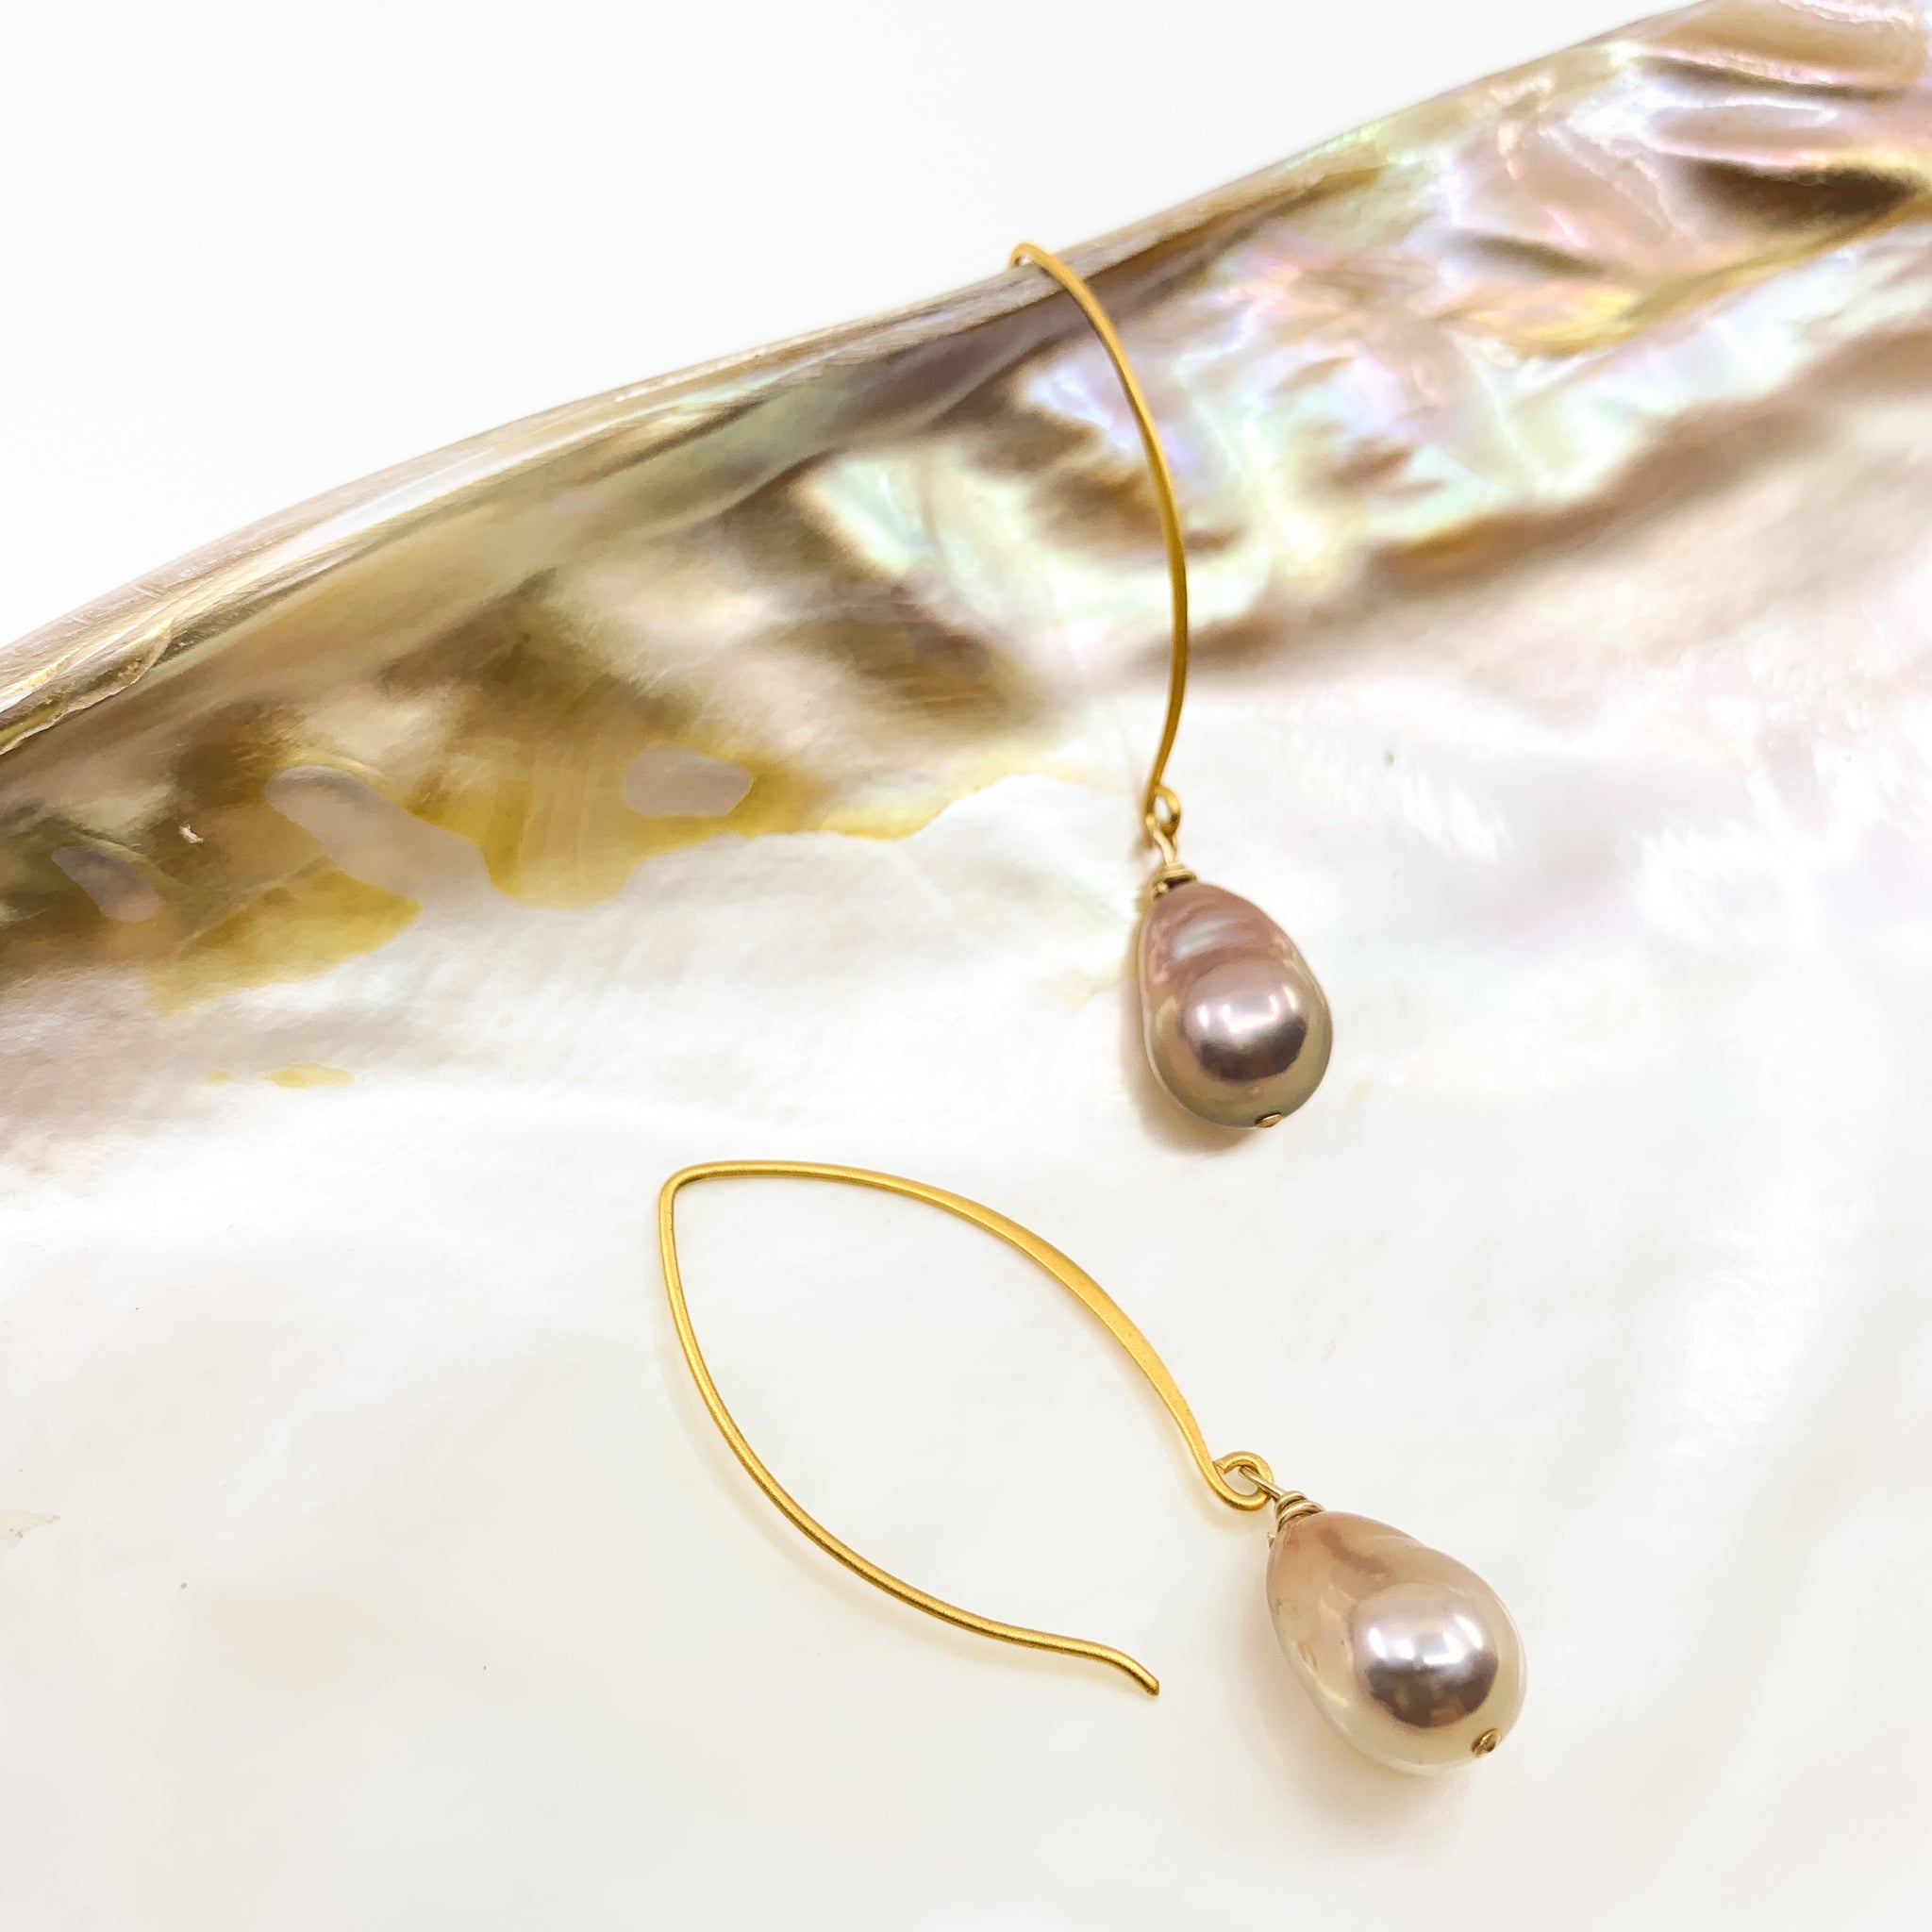 pink baroque Edison pearls gold earrings by eve black jewelry made in Hawaii